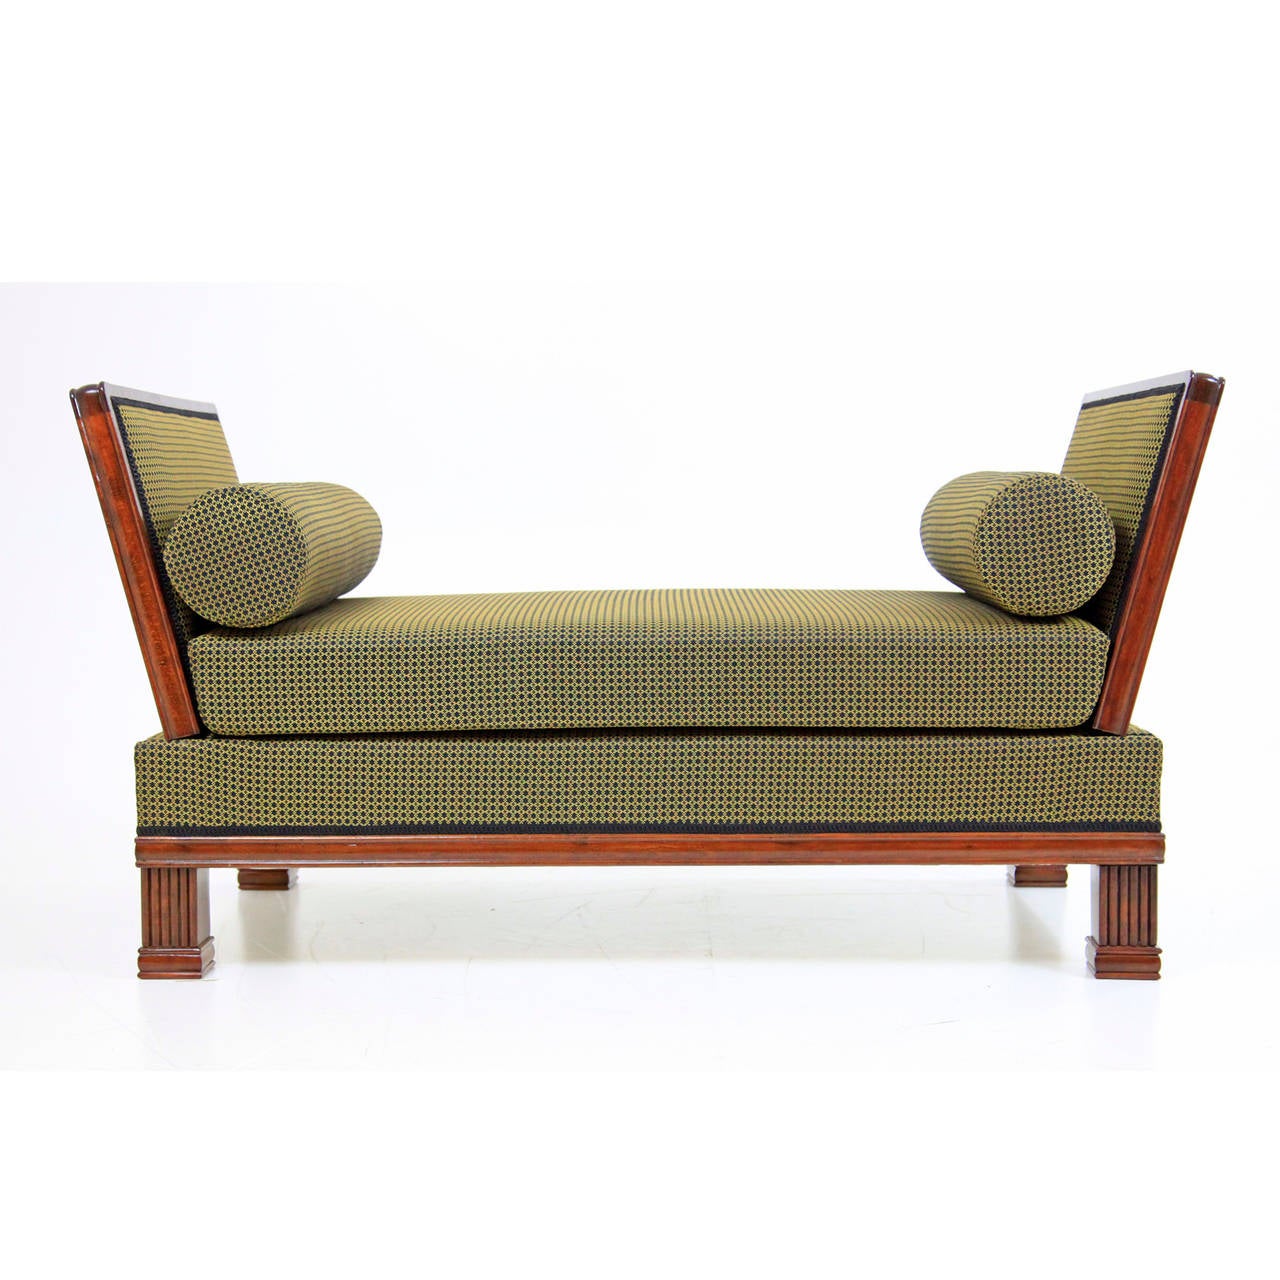 20th Century French Art Deco Daybed / Recliner from the 1920s